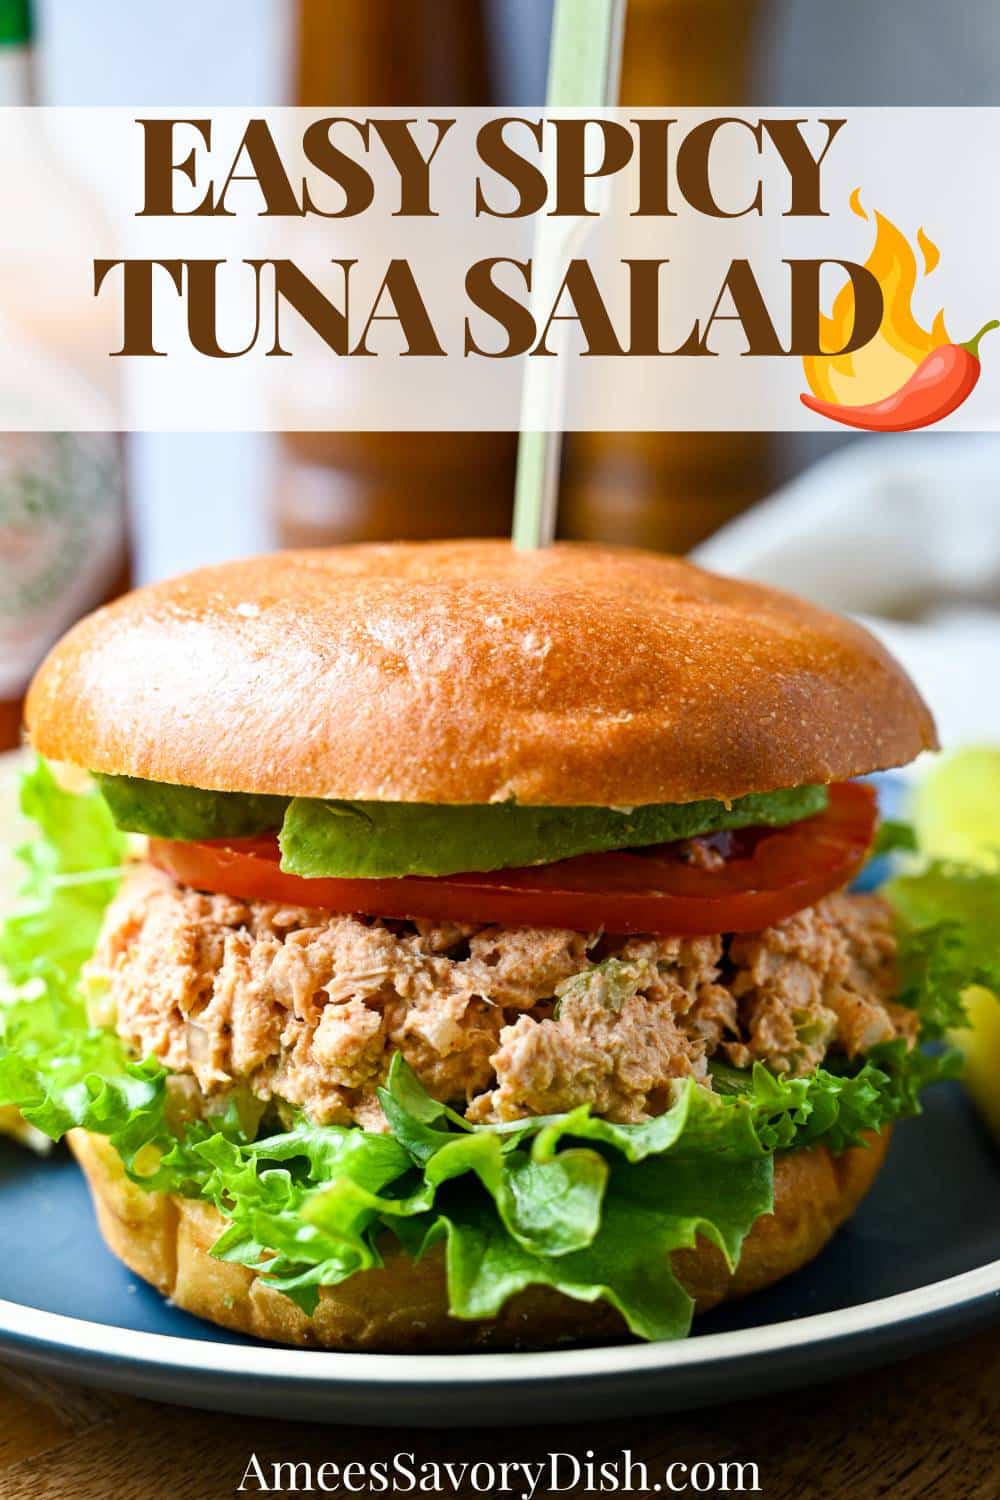 An irresistible fusion of albacore tuna, creamy mayo, spicy Dijon, pickled jalapeños, crisp veggies, fiery spices, and Tabasco sauce. via @Ameessavorydish